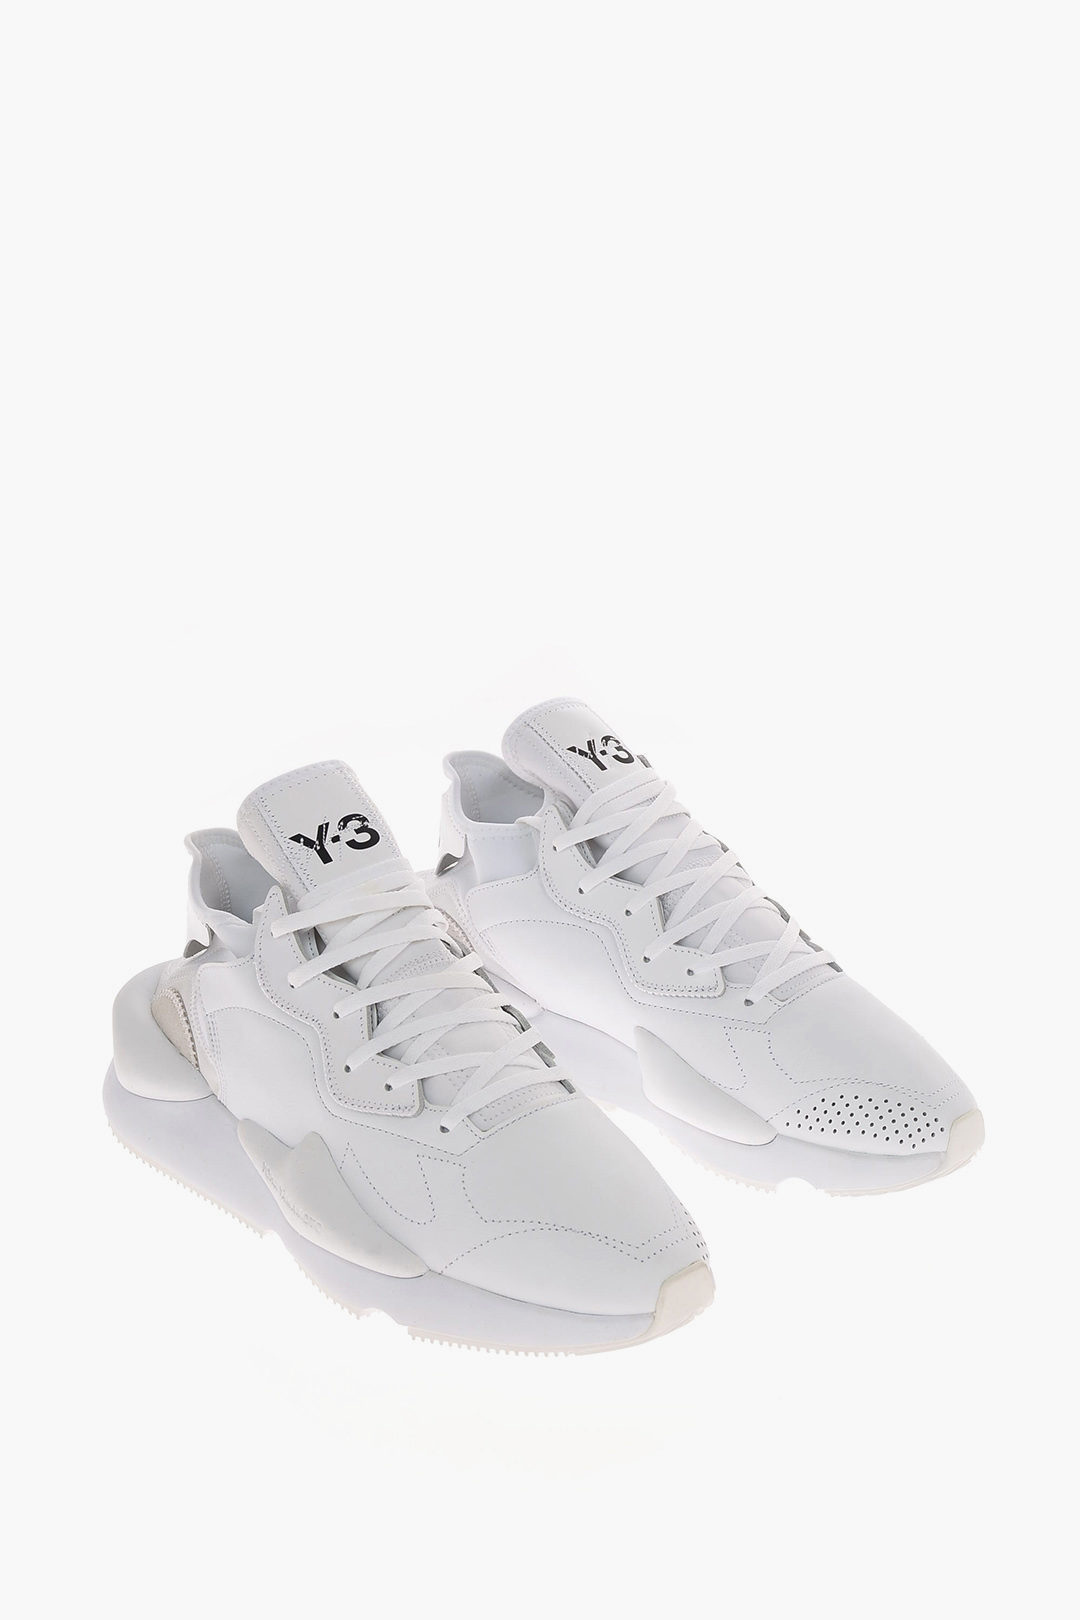 Bounty puur legaal Y-3 by Yohji Yamamoto ADIDAS leather Y-3 KAIWA High-top Sneakers unisex men  women - Glamood Outlet